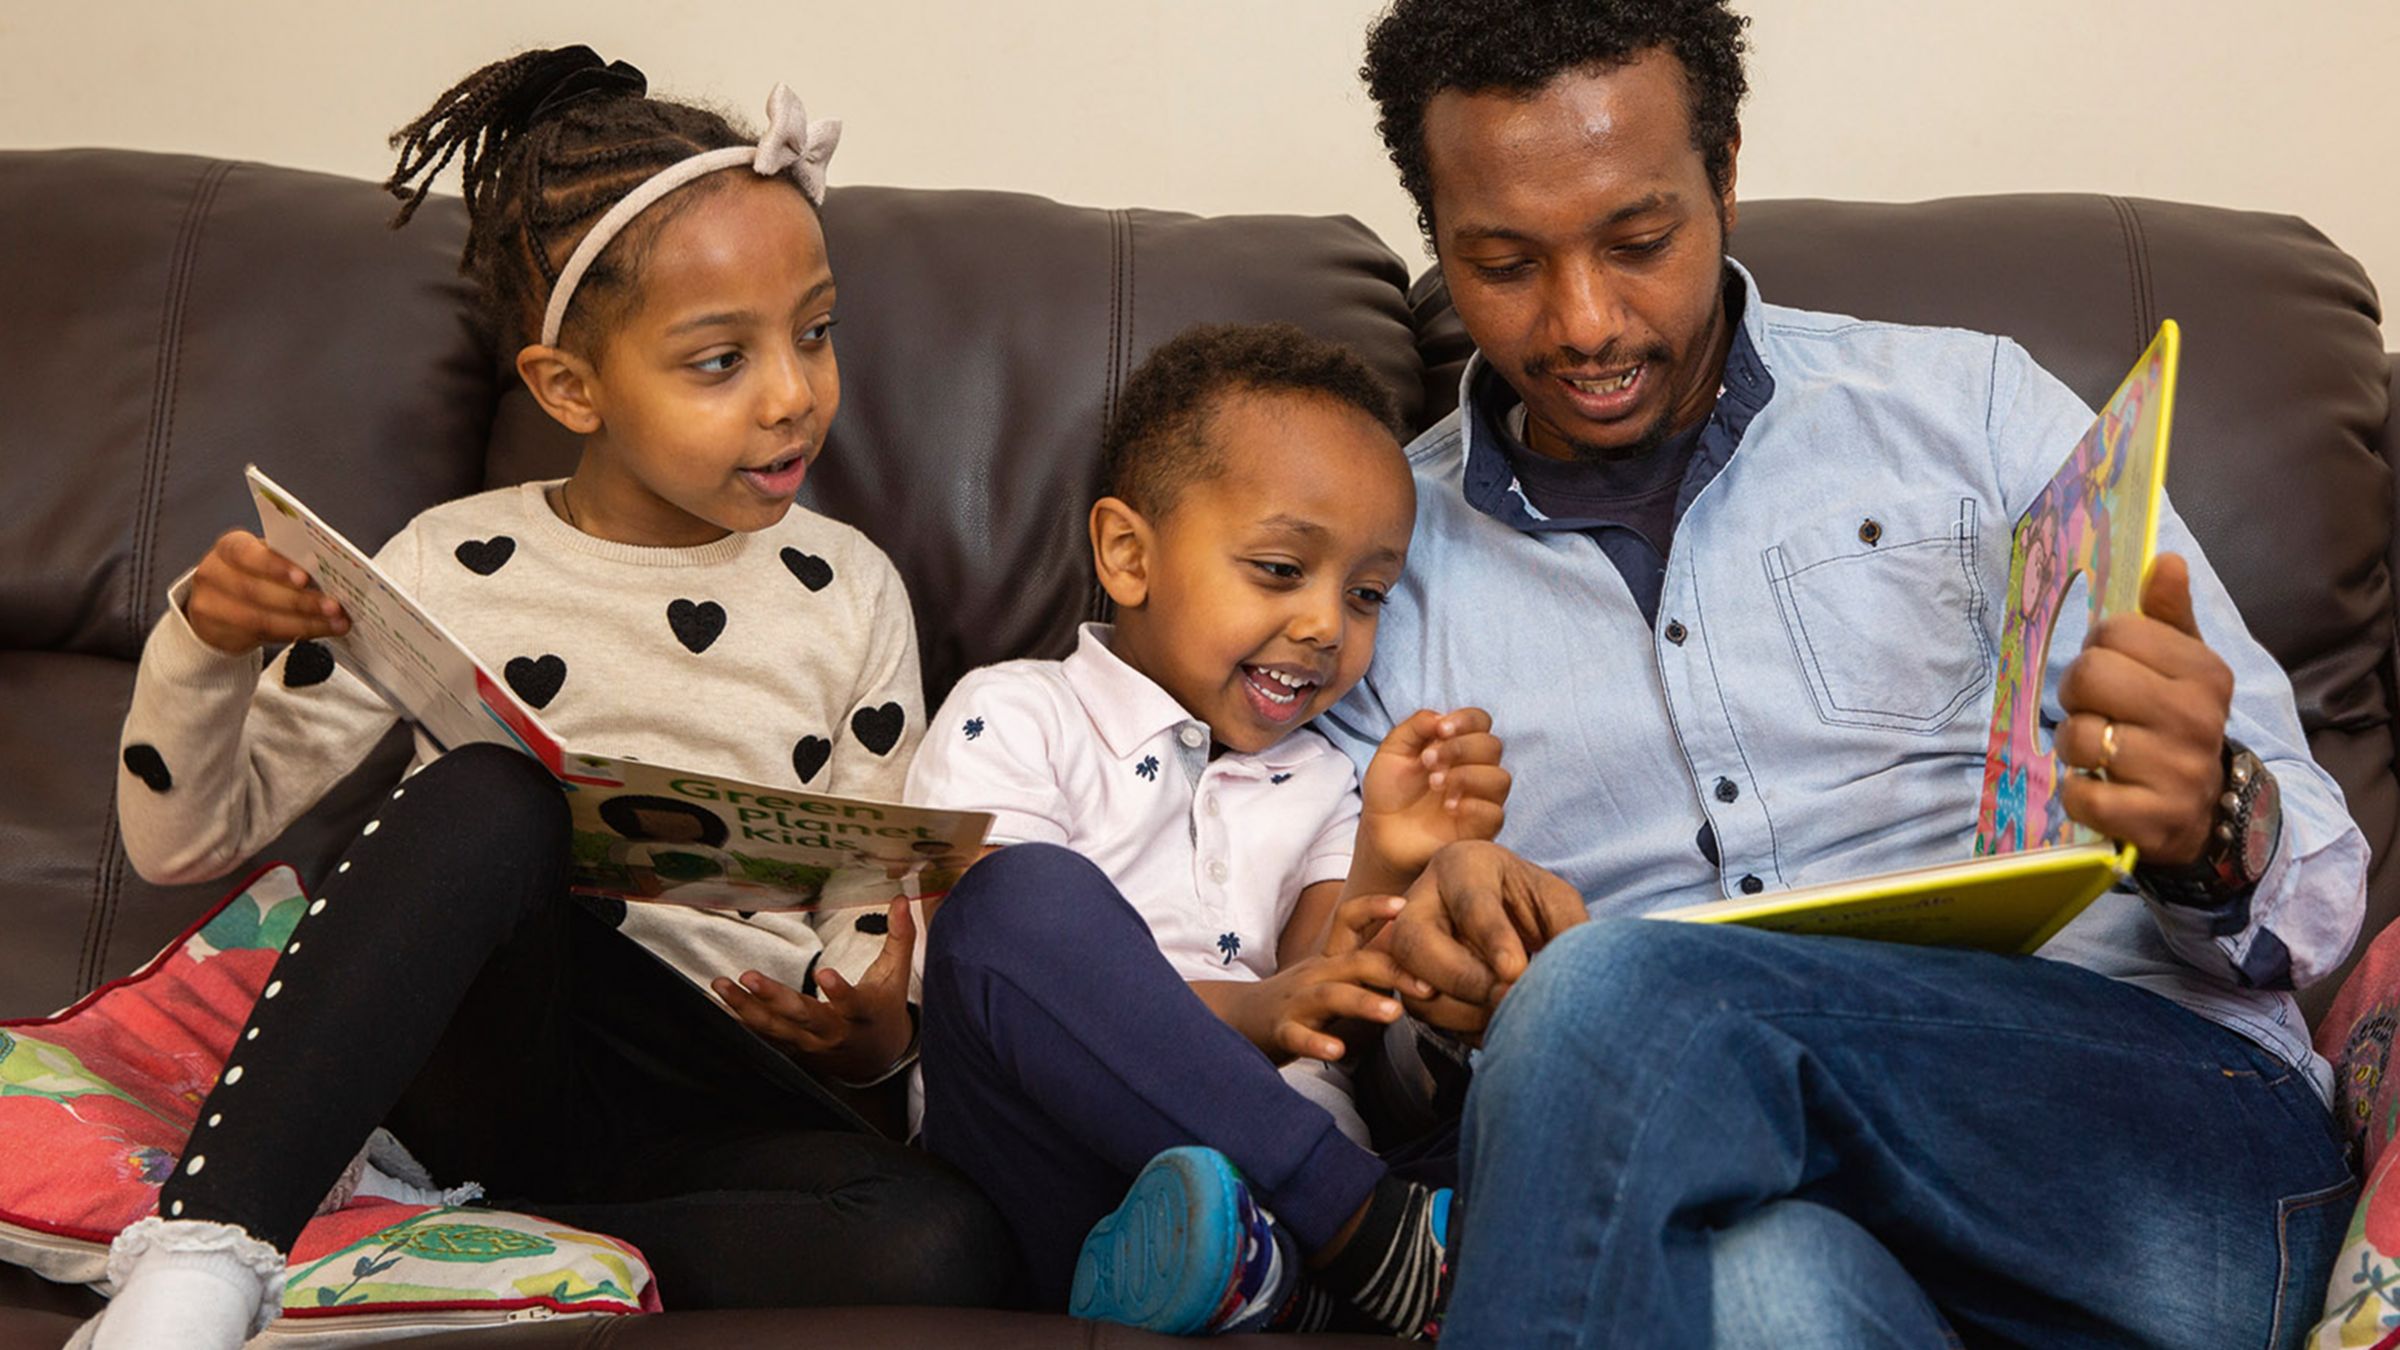  Give a Little Love - Father and children on sofa reading childrens books